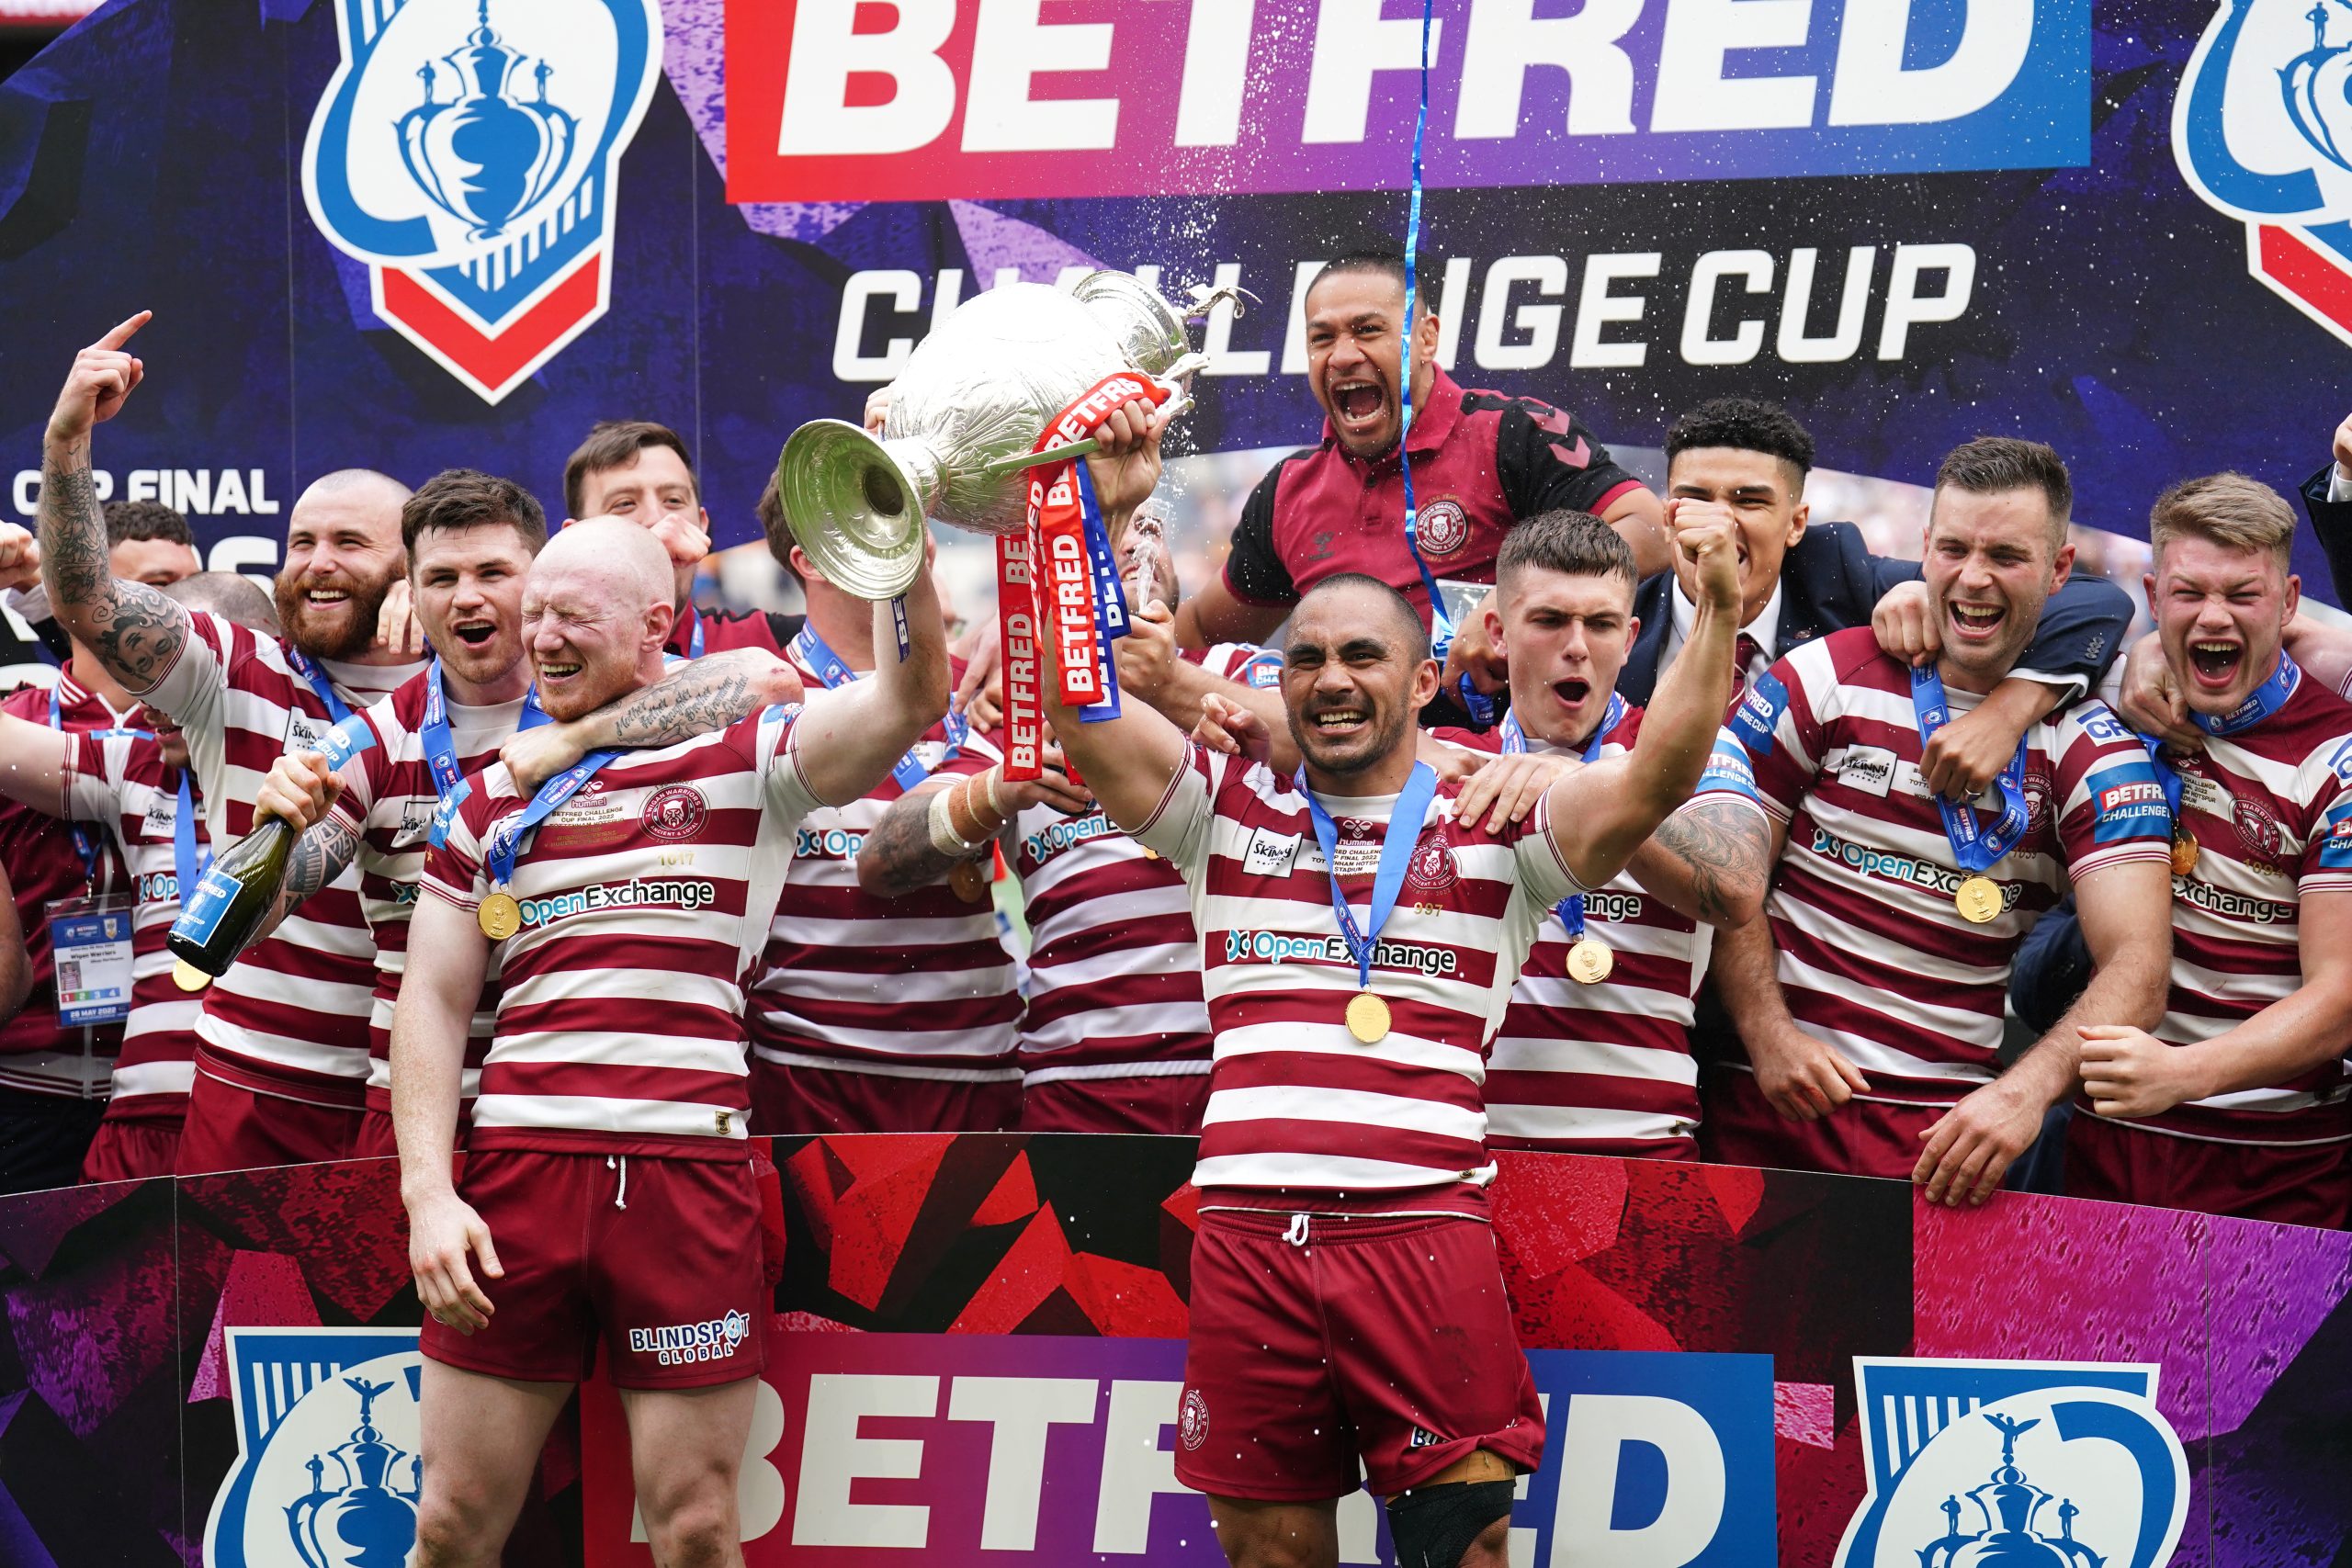 Challenge Cup could feature a group stage for the first time from next season